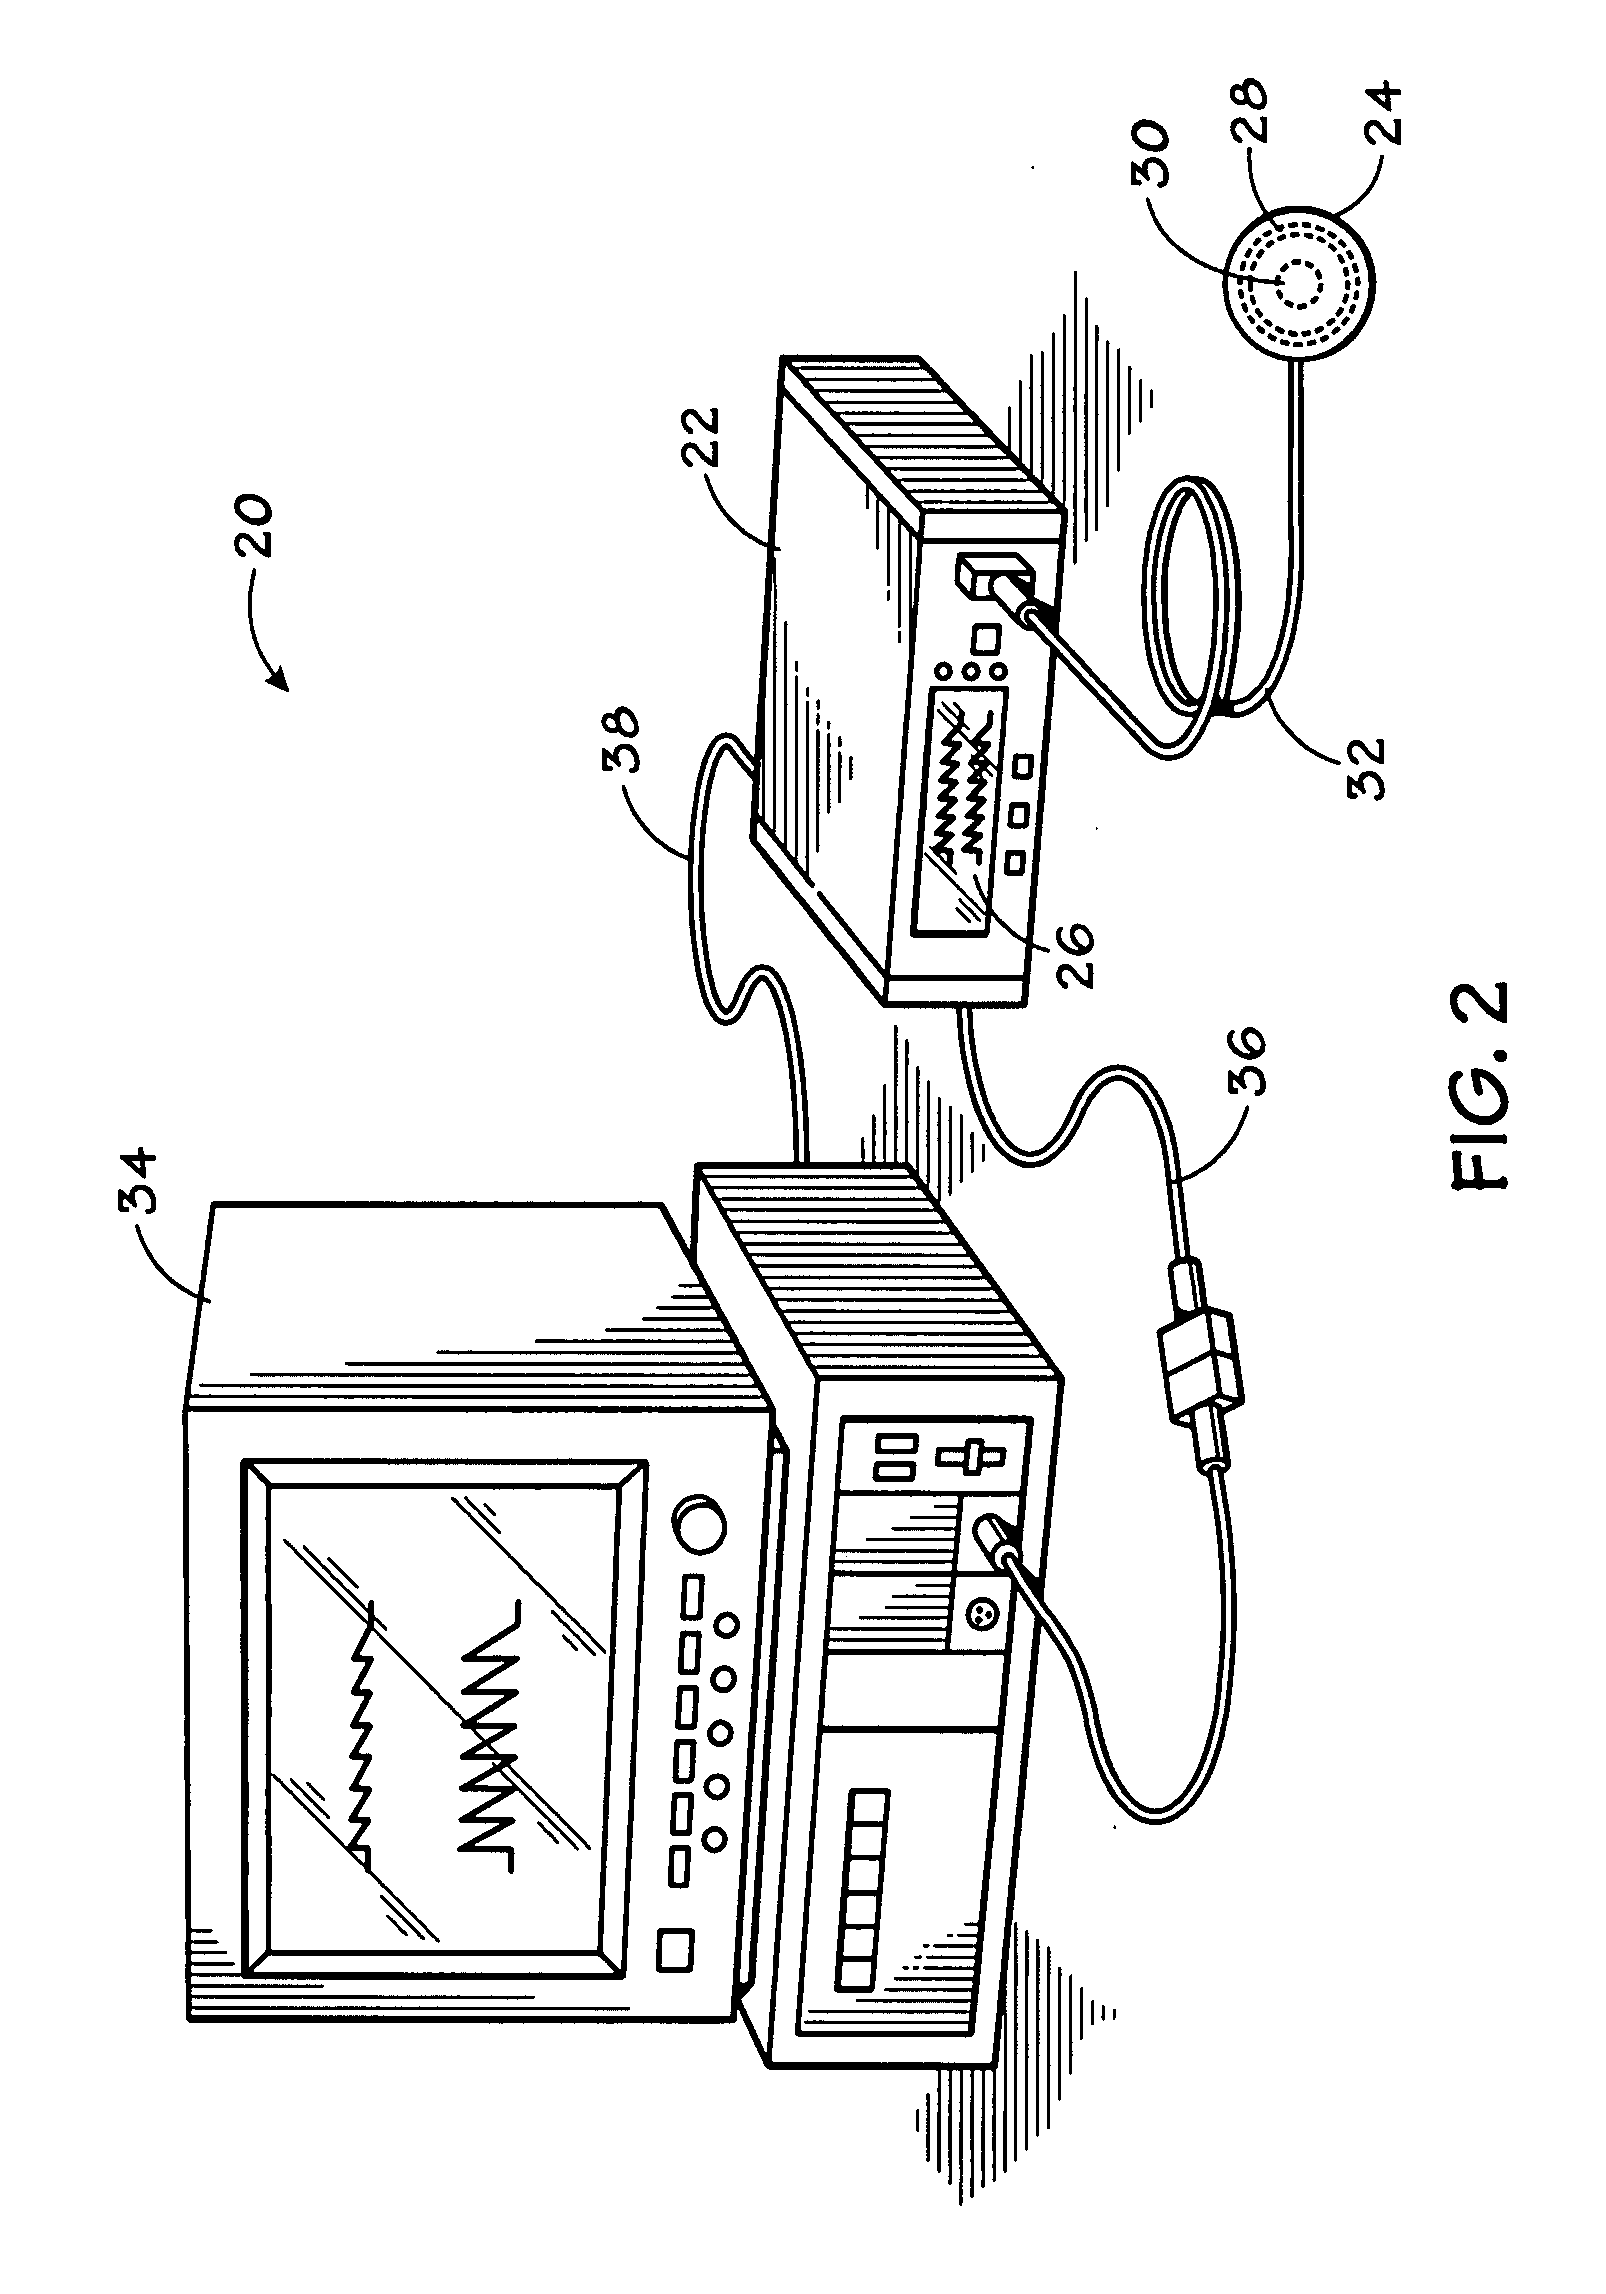 Method and apparatus for spectroscopic tissue analyte measurement